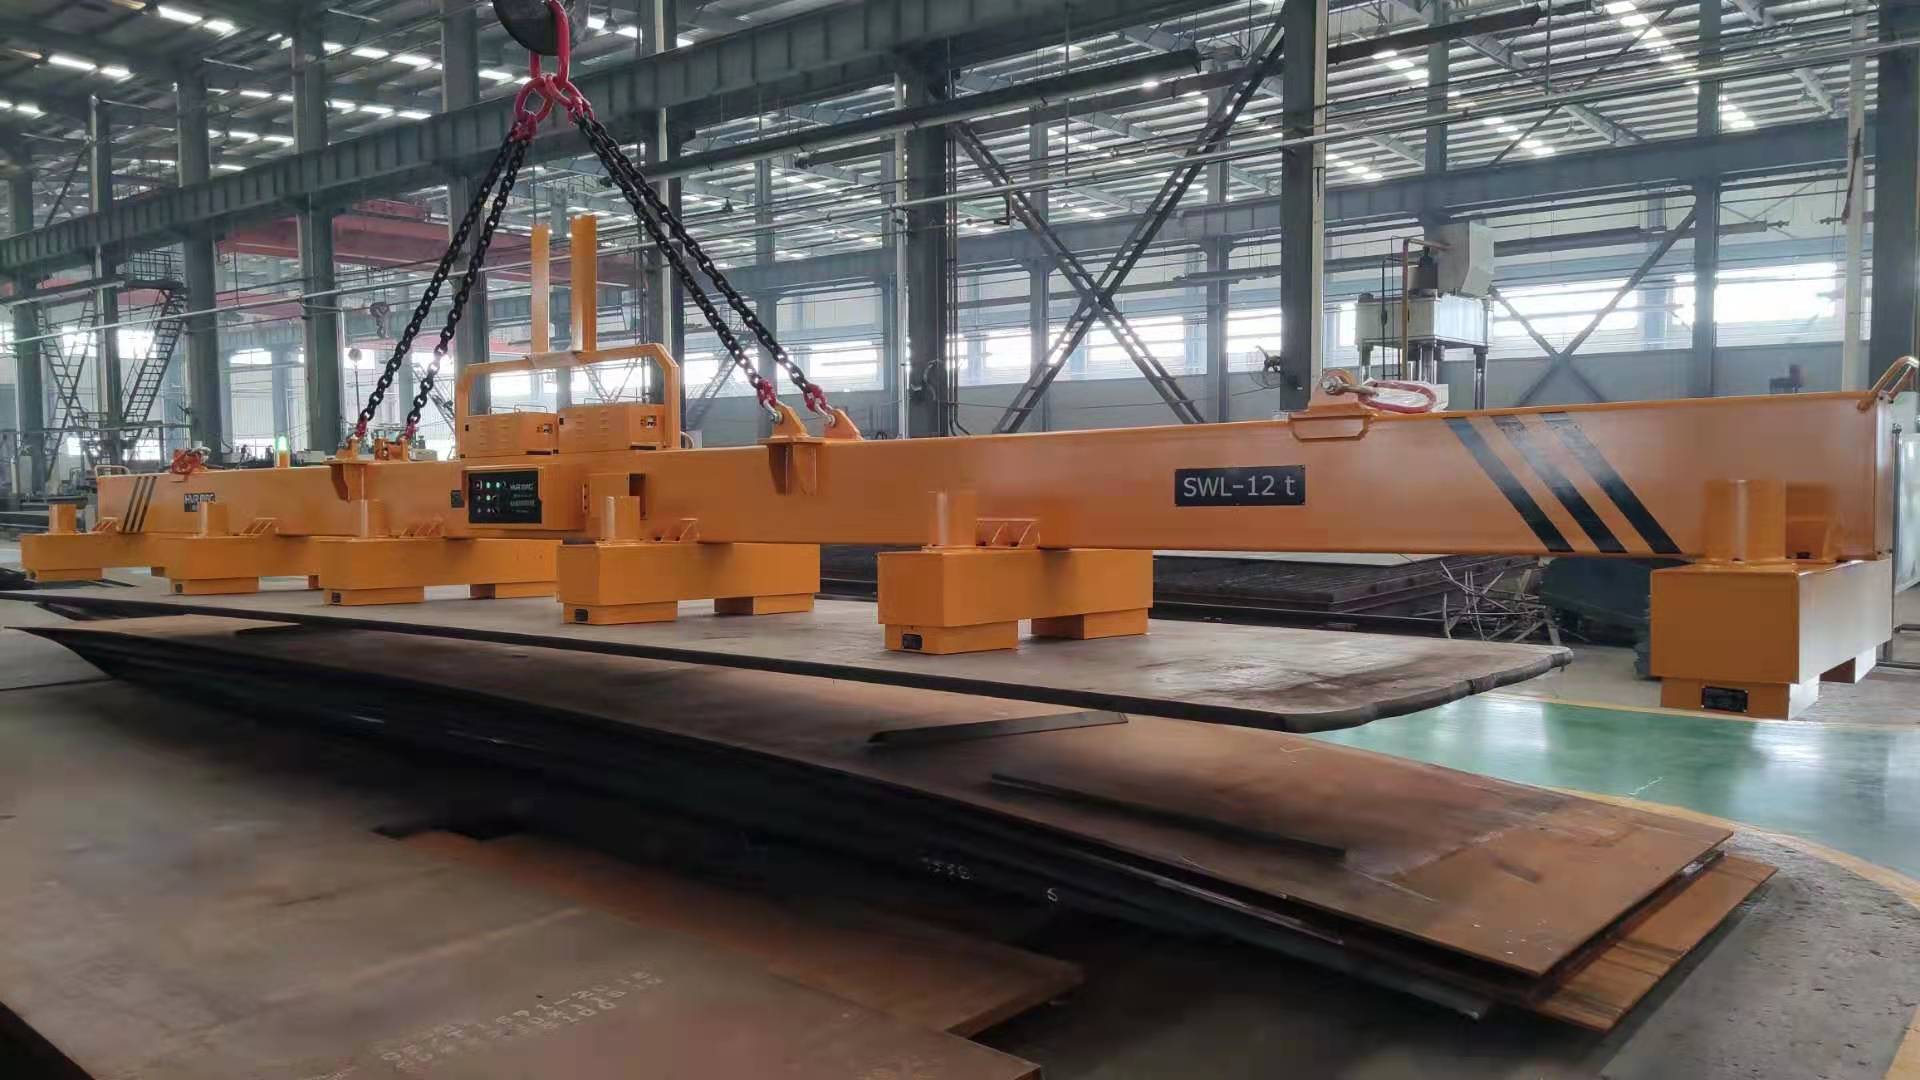 12 Ton Magnetic Lifting Beam Unloading Steel Plate from Cutting Table - HVR MAG